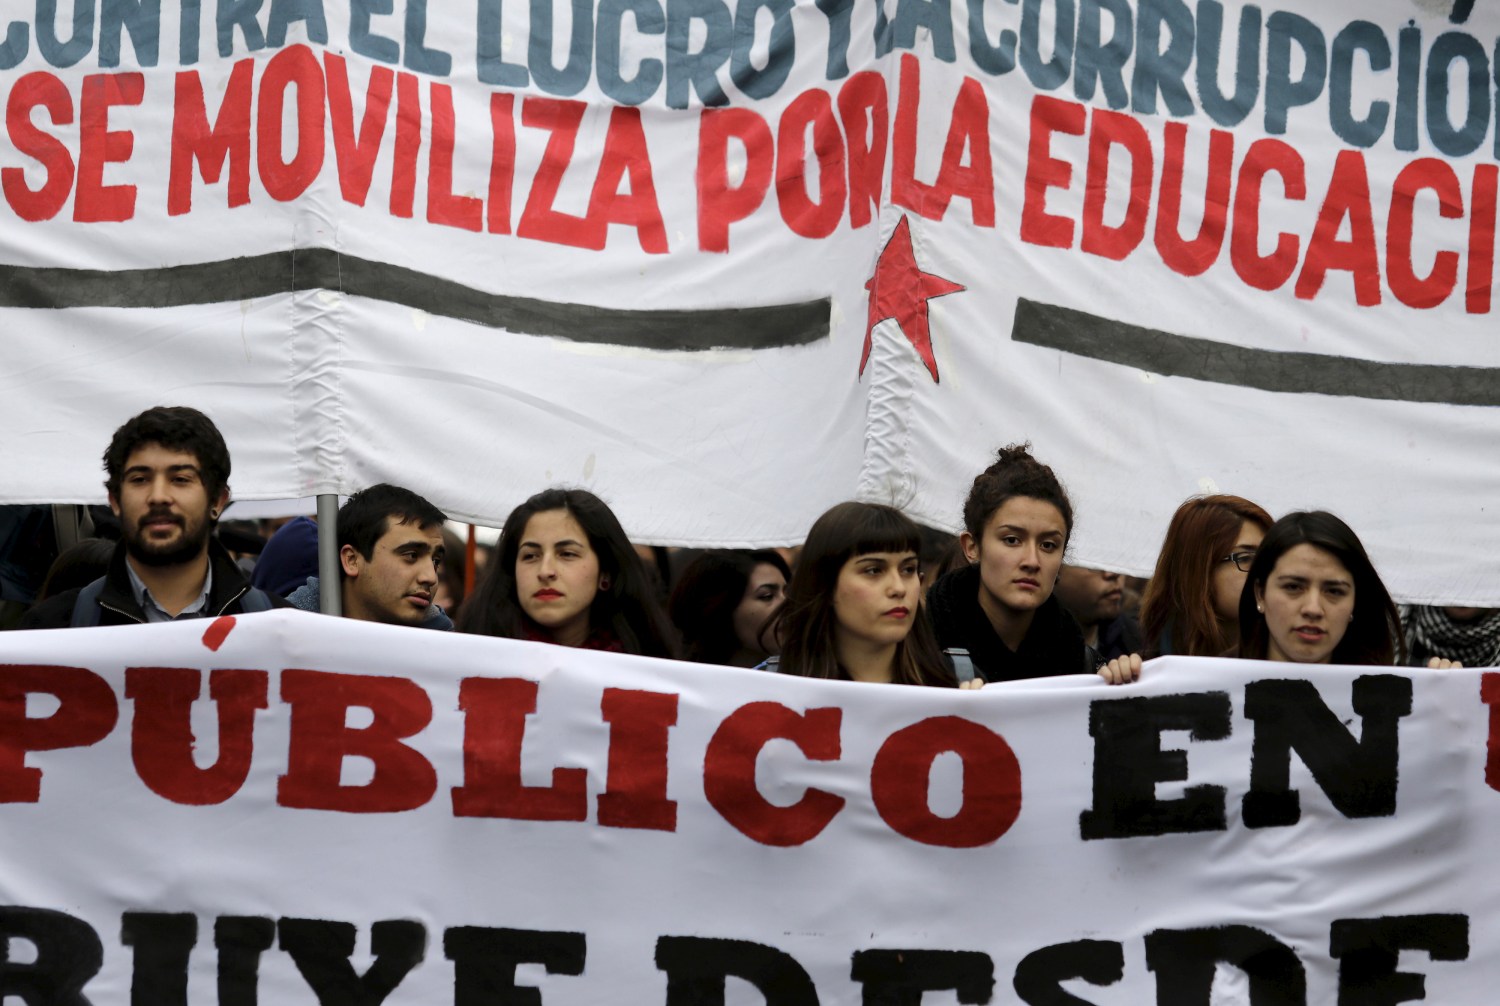 Students attend a protest rally against Chile's government to demand changes in the education system.